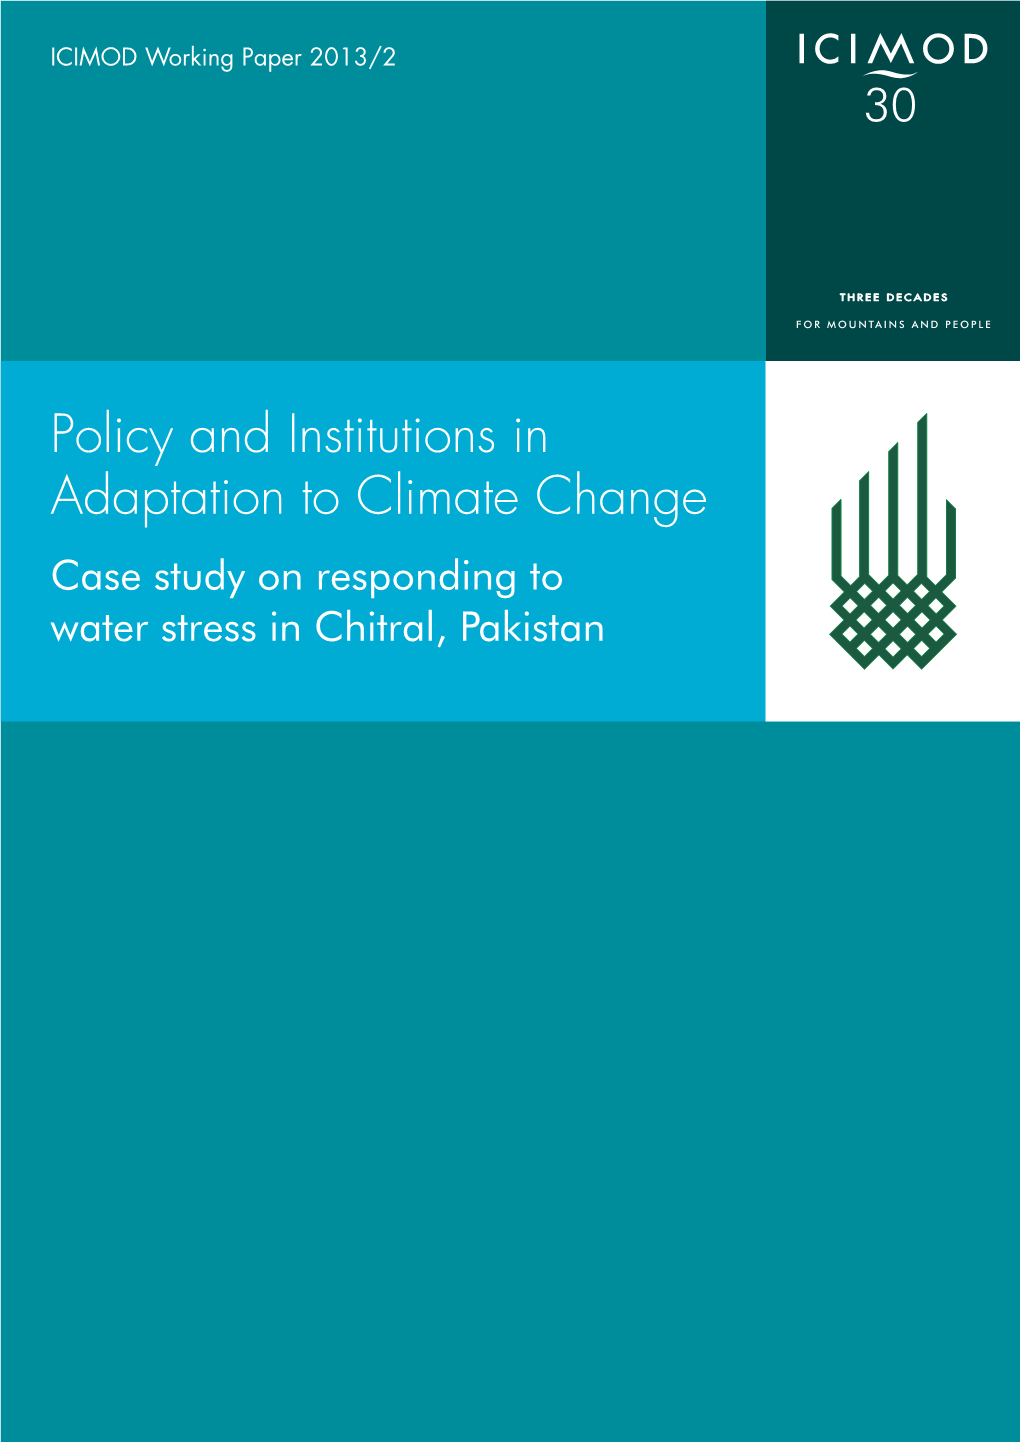 Policy and Institutions in Adaptation to Climate Change Case Study on Responding to Water Stress in Chitral, Pakistan